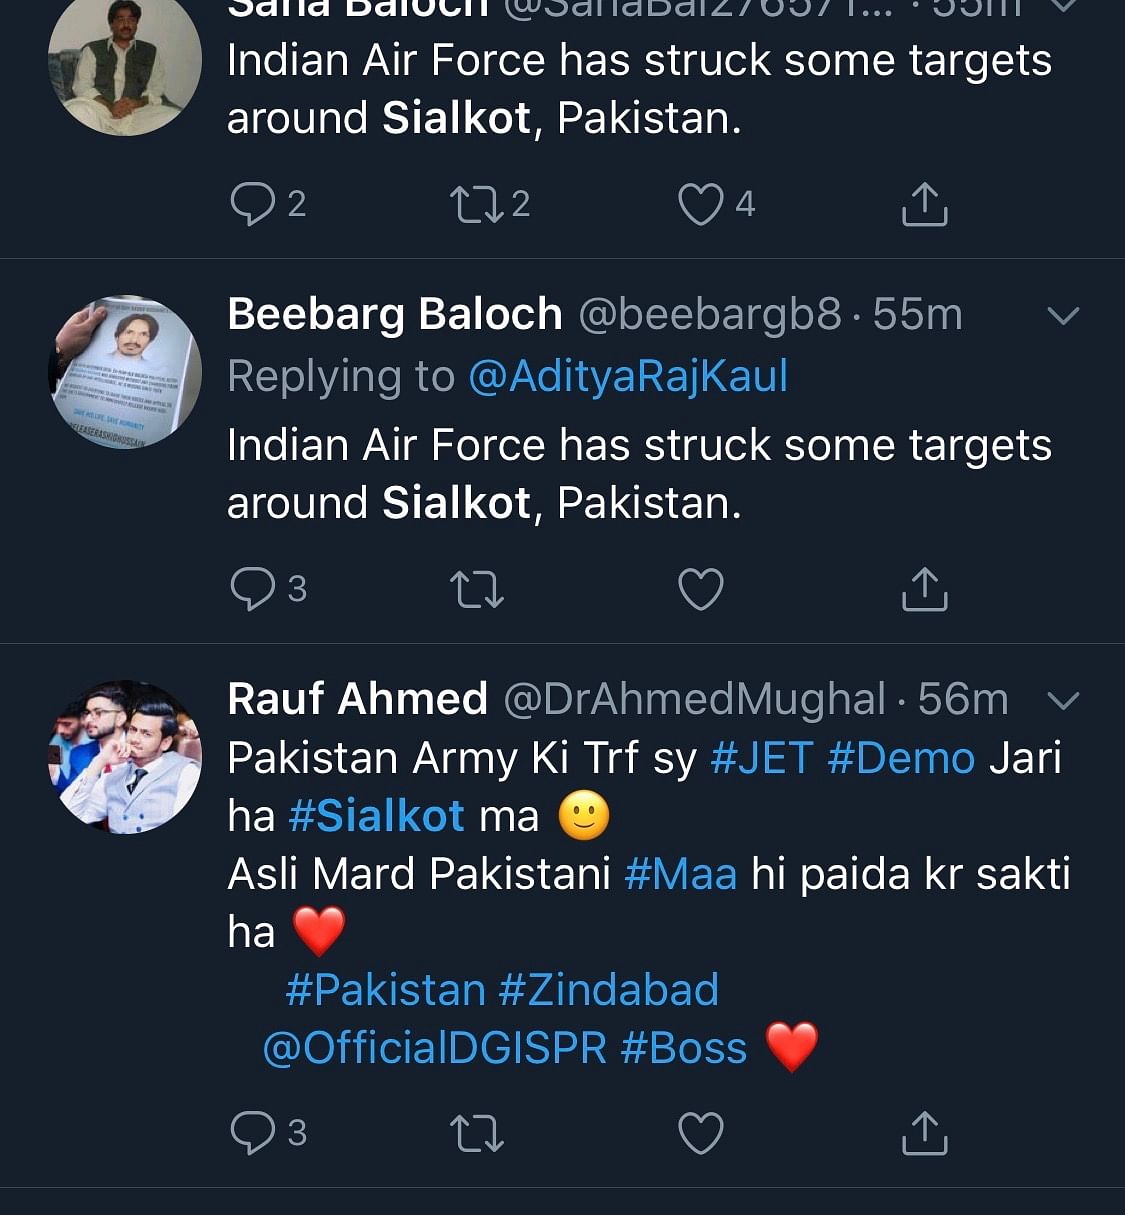 Many took to Twitter after mistaking sonic boom from Pakistan Air Force’s jets for war between India and Pakistan.